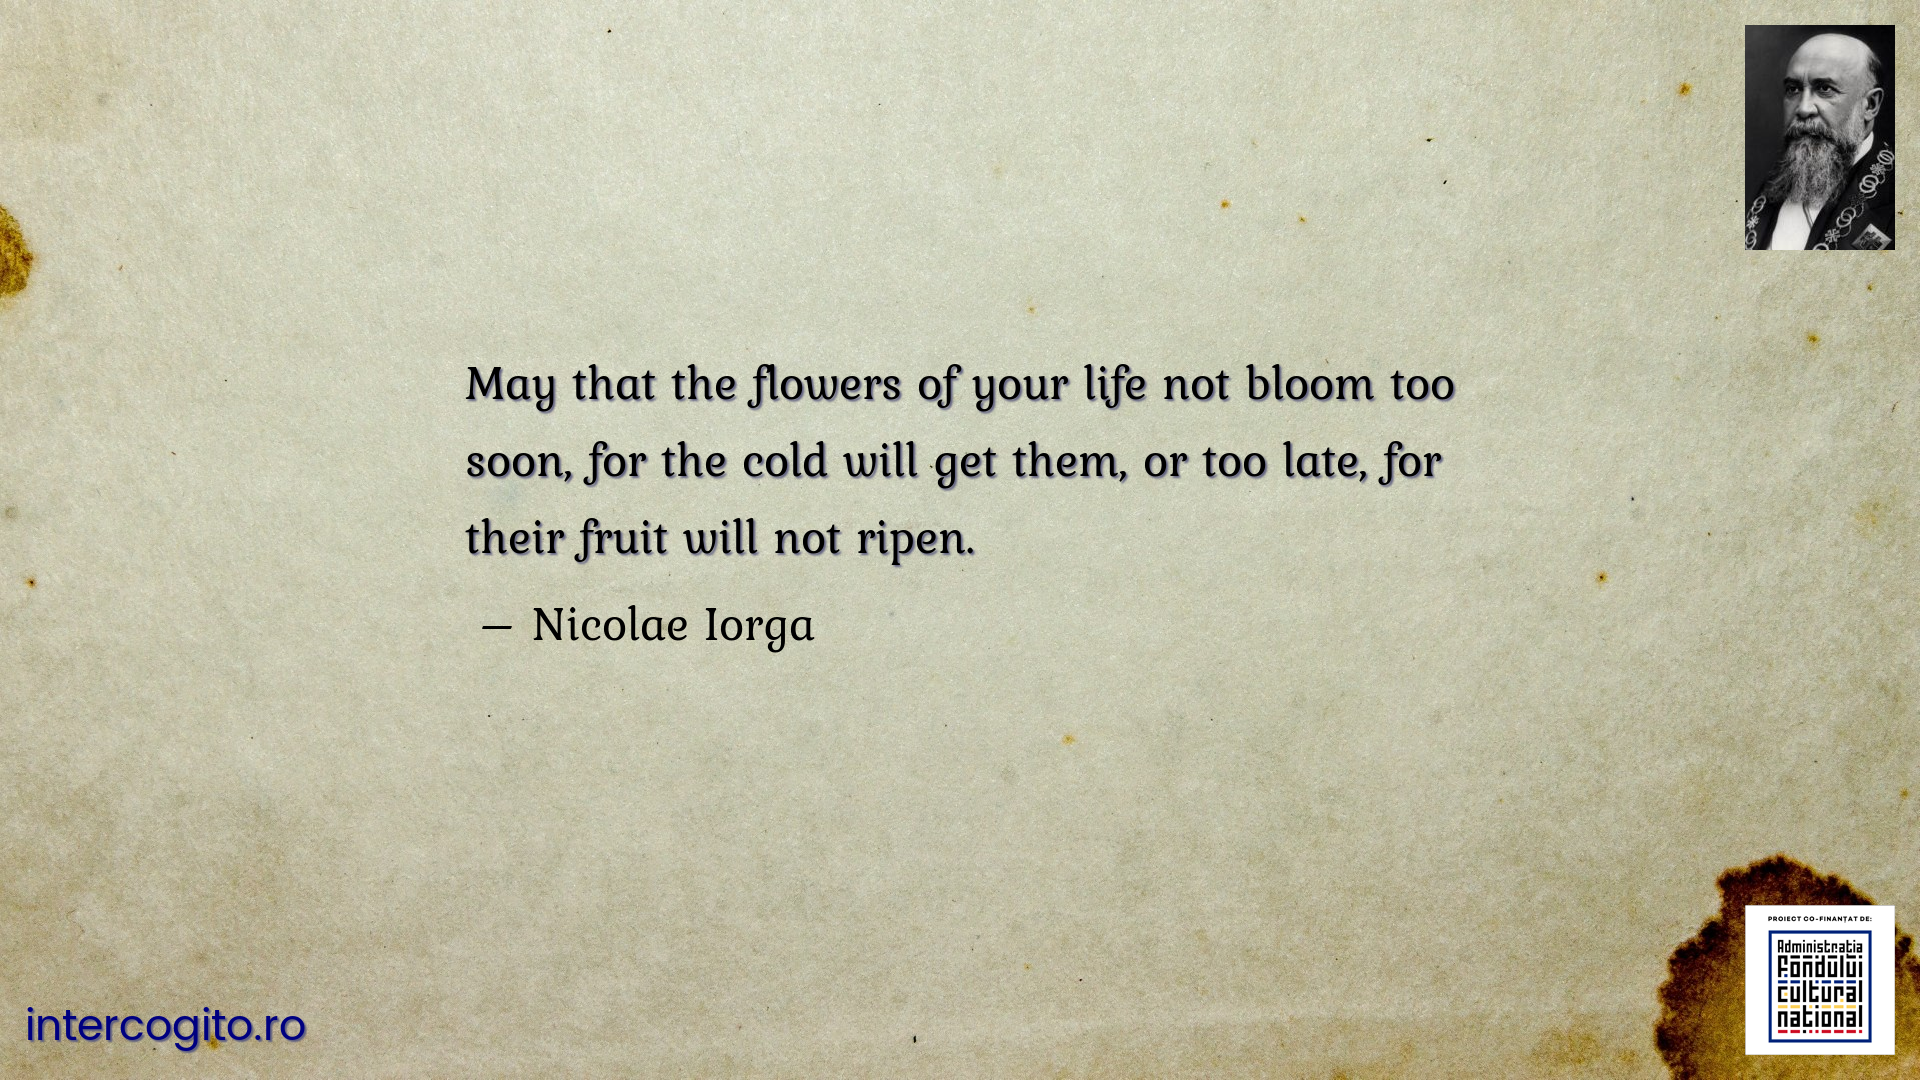 May that the flowers of your life not bloom too soon, for the cold will get them, or too late, for their fruit will not ripen.